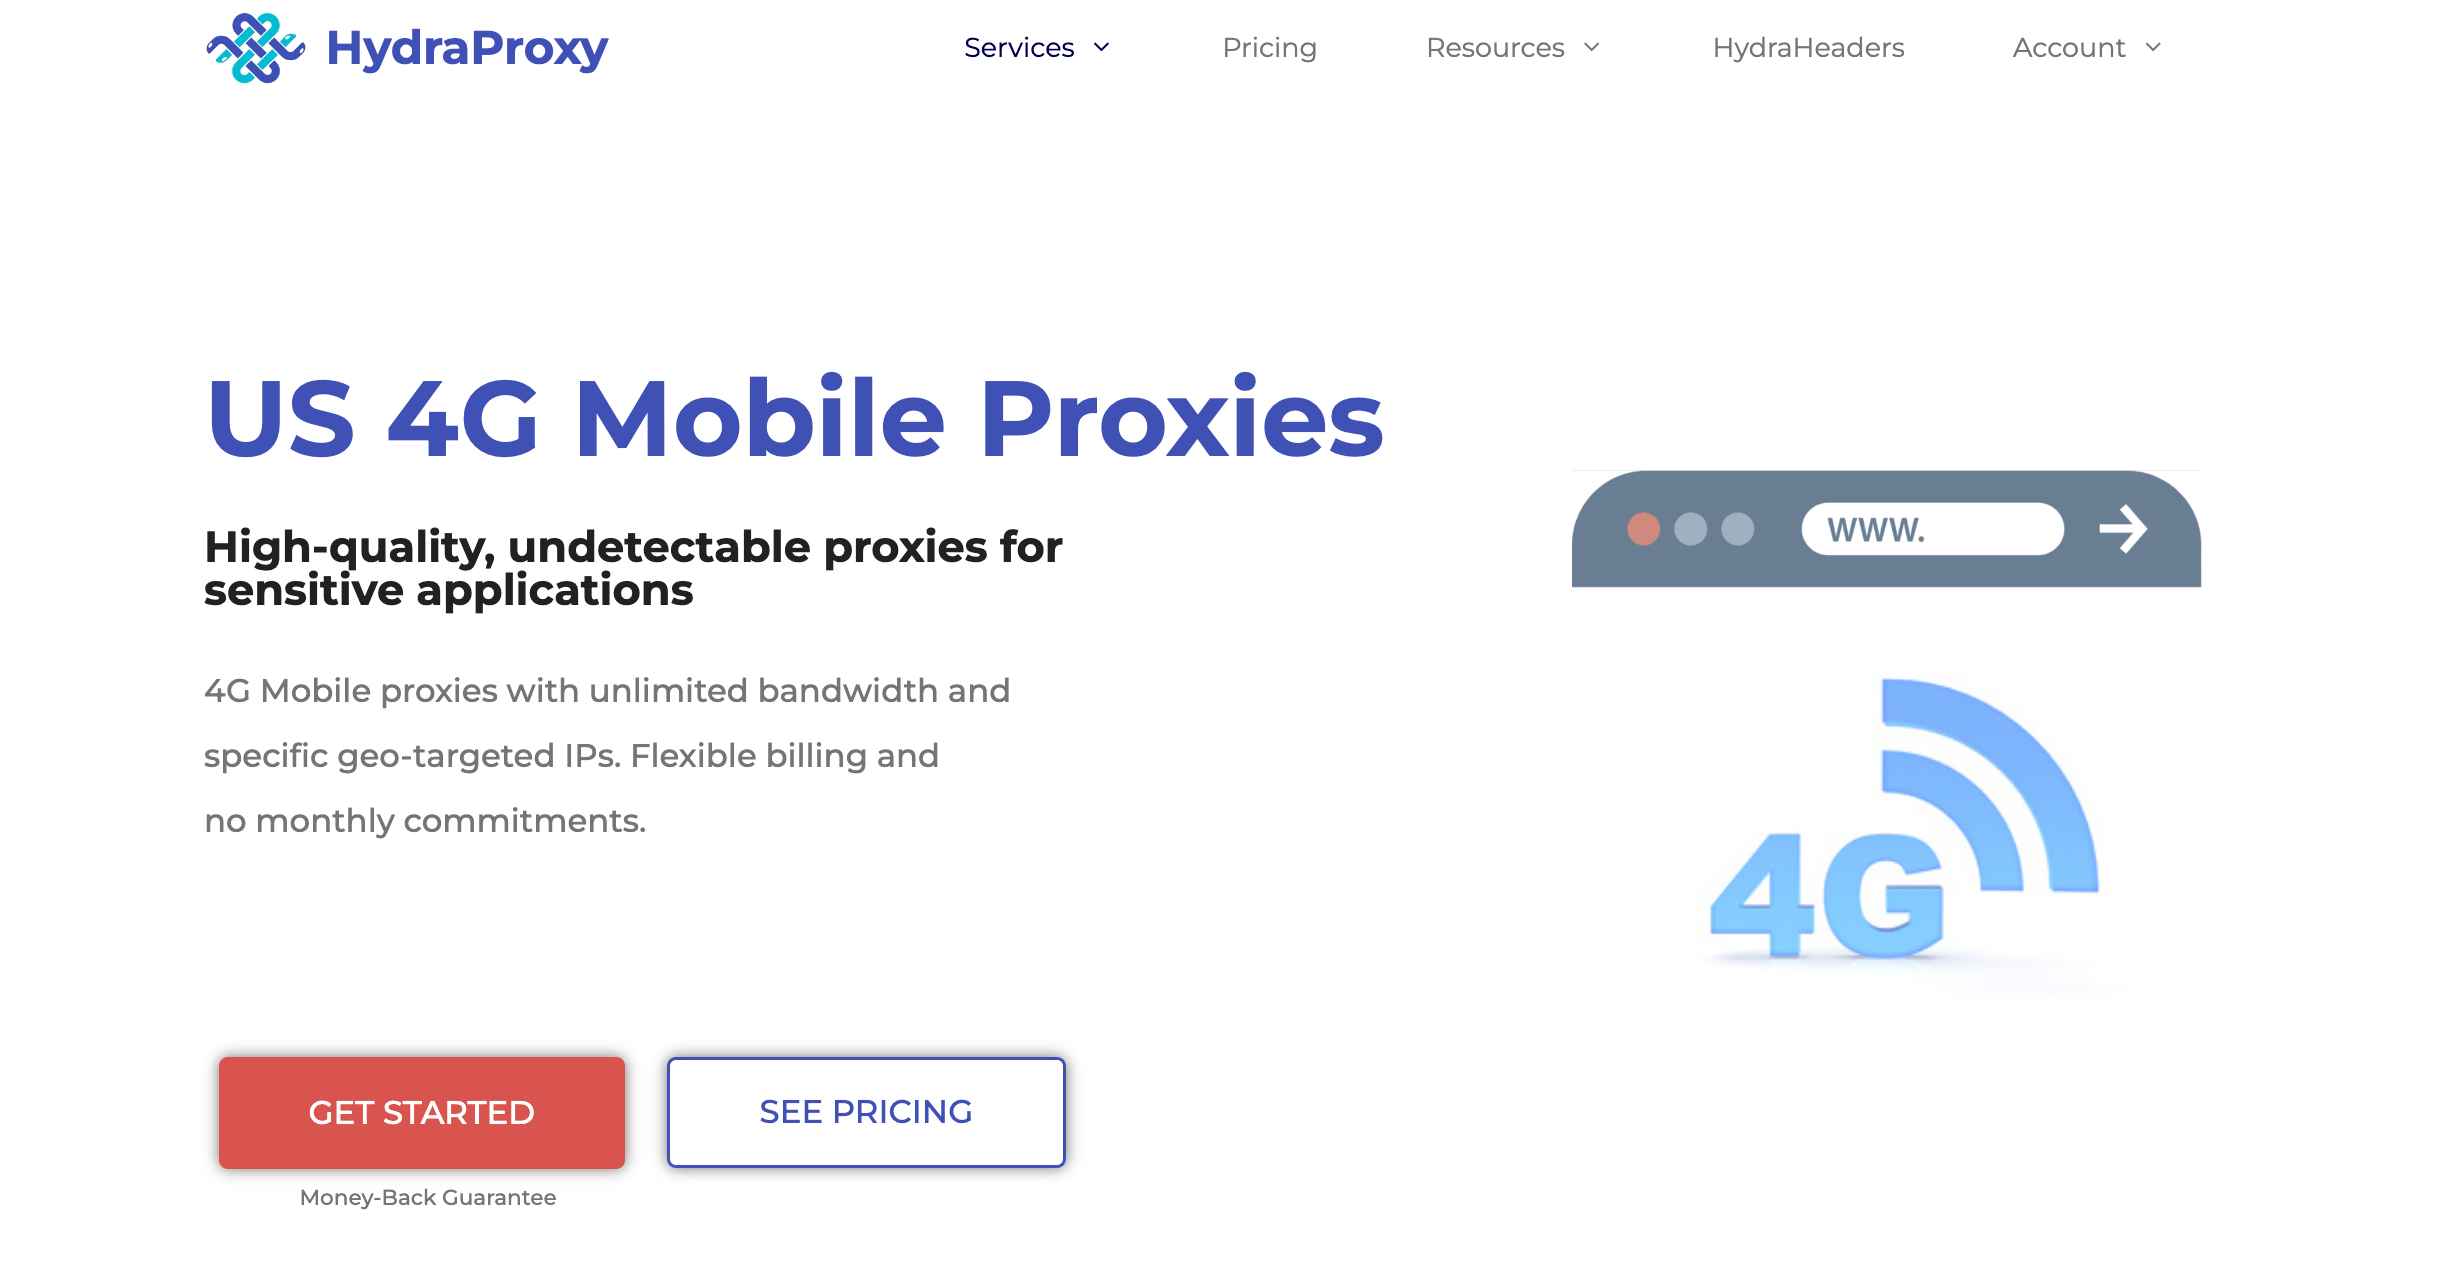 Mobile Proxies offered by HydraProxy